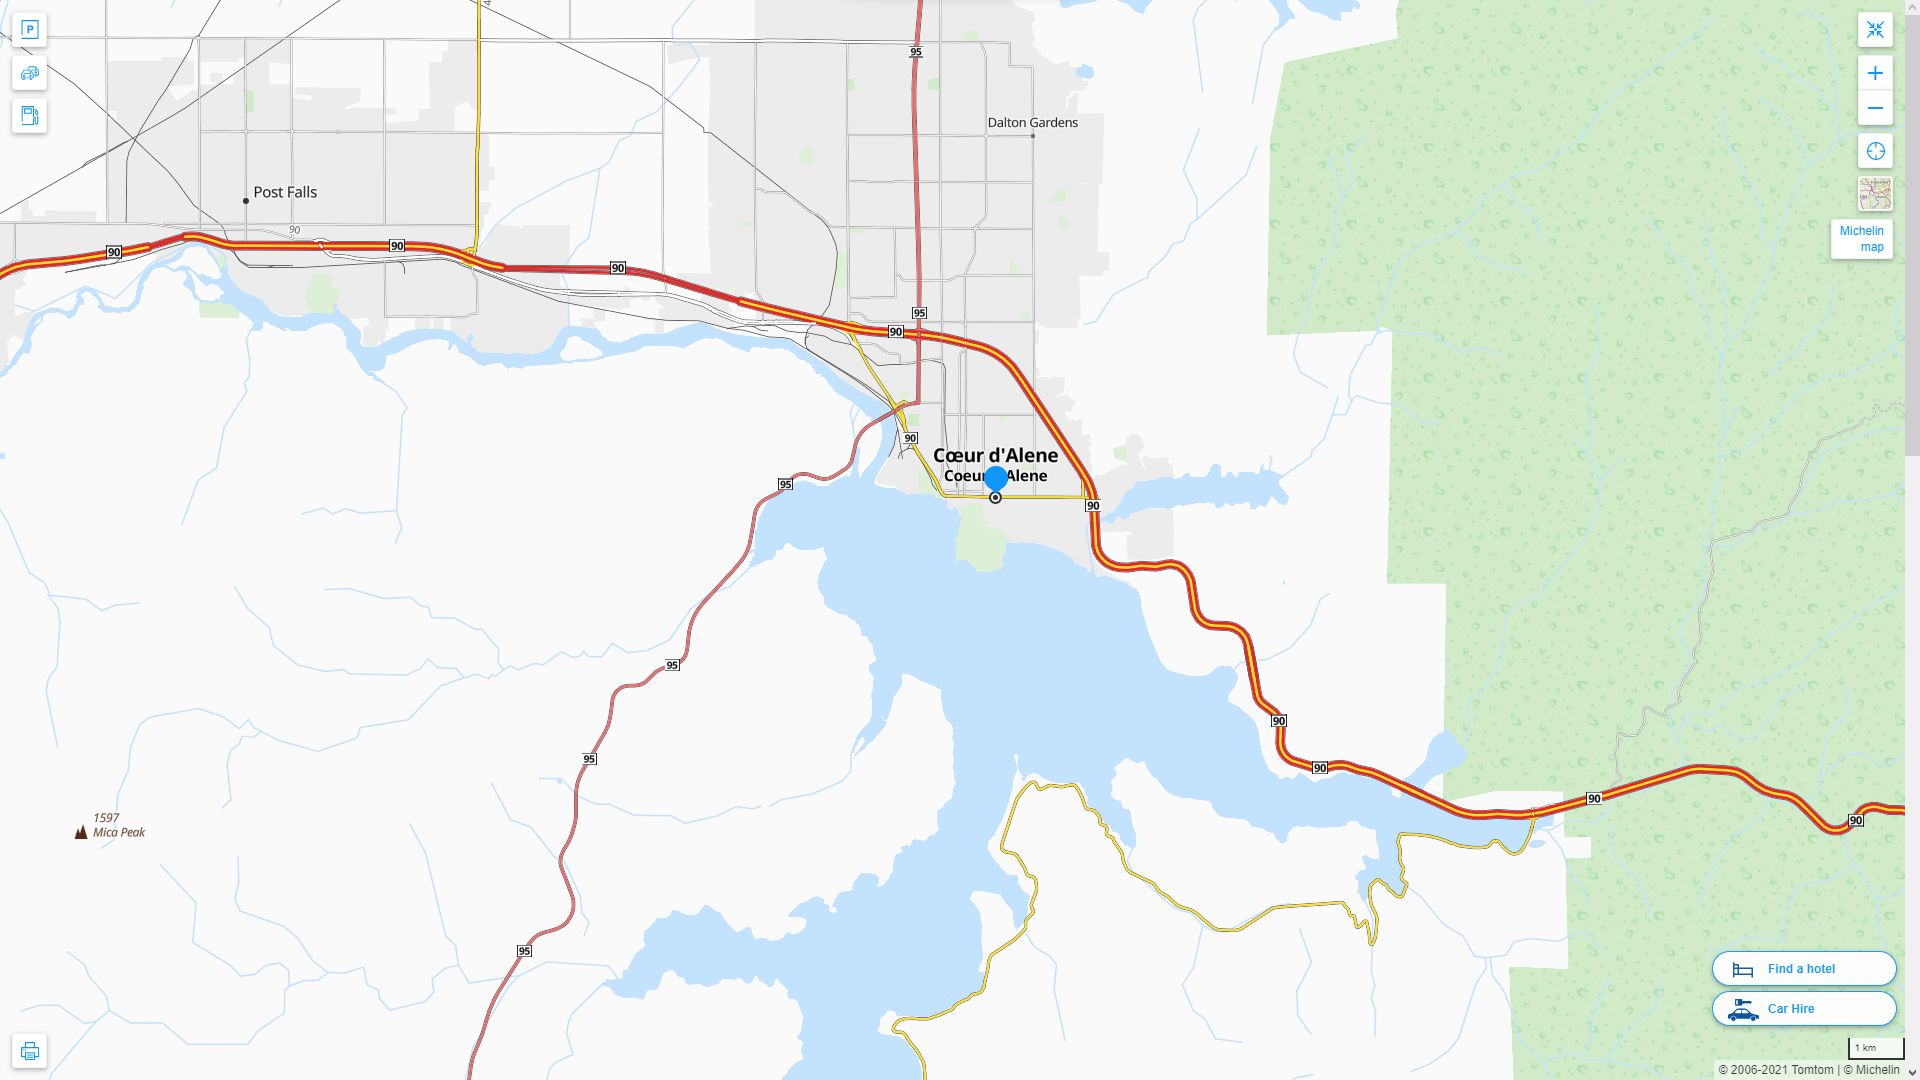 Coeur d'Alene idaho Highway and Road Map